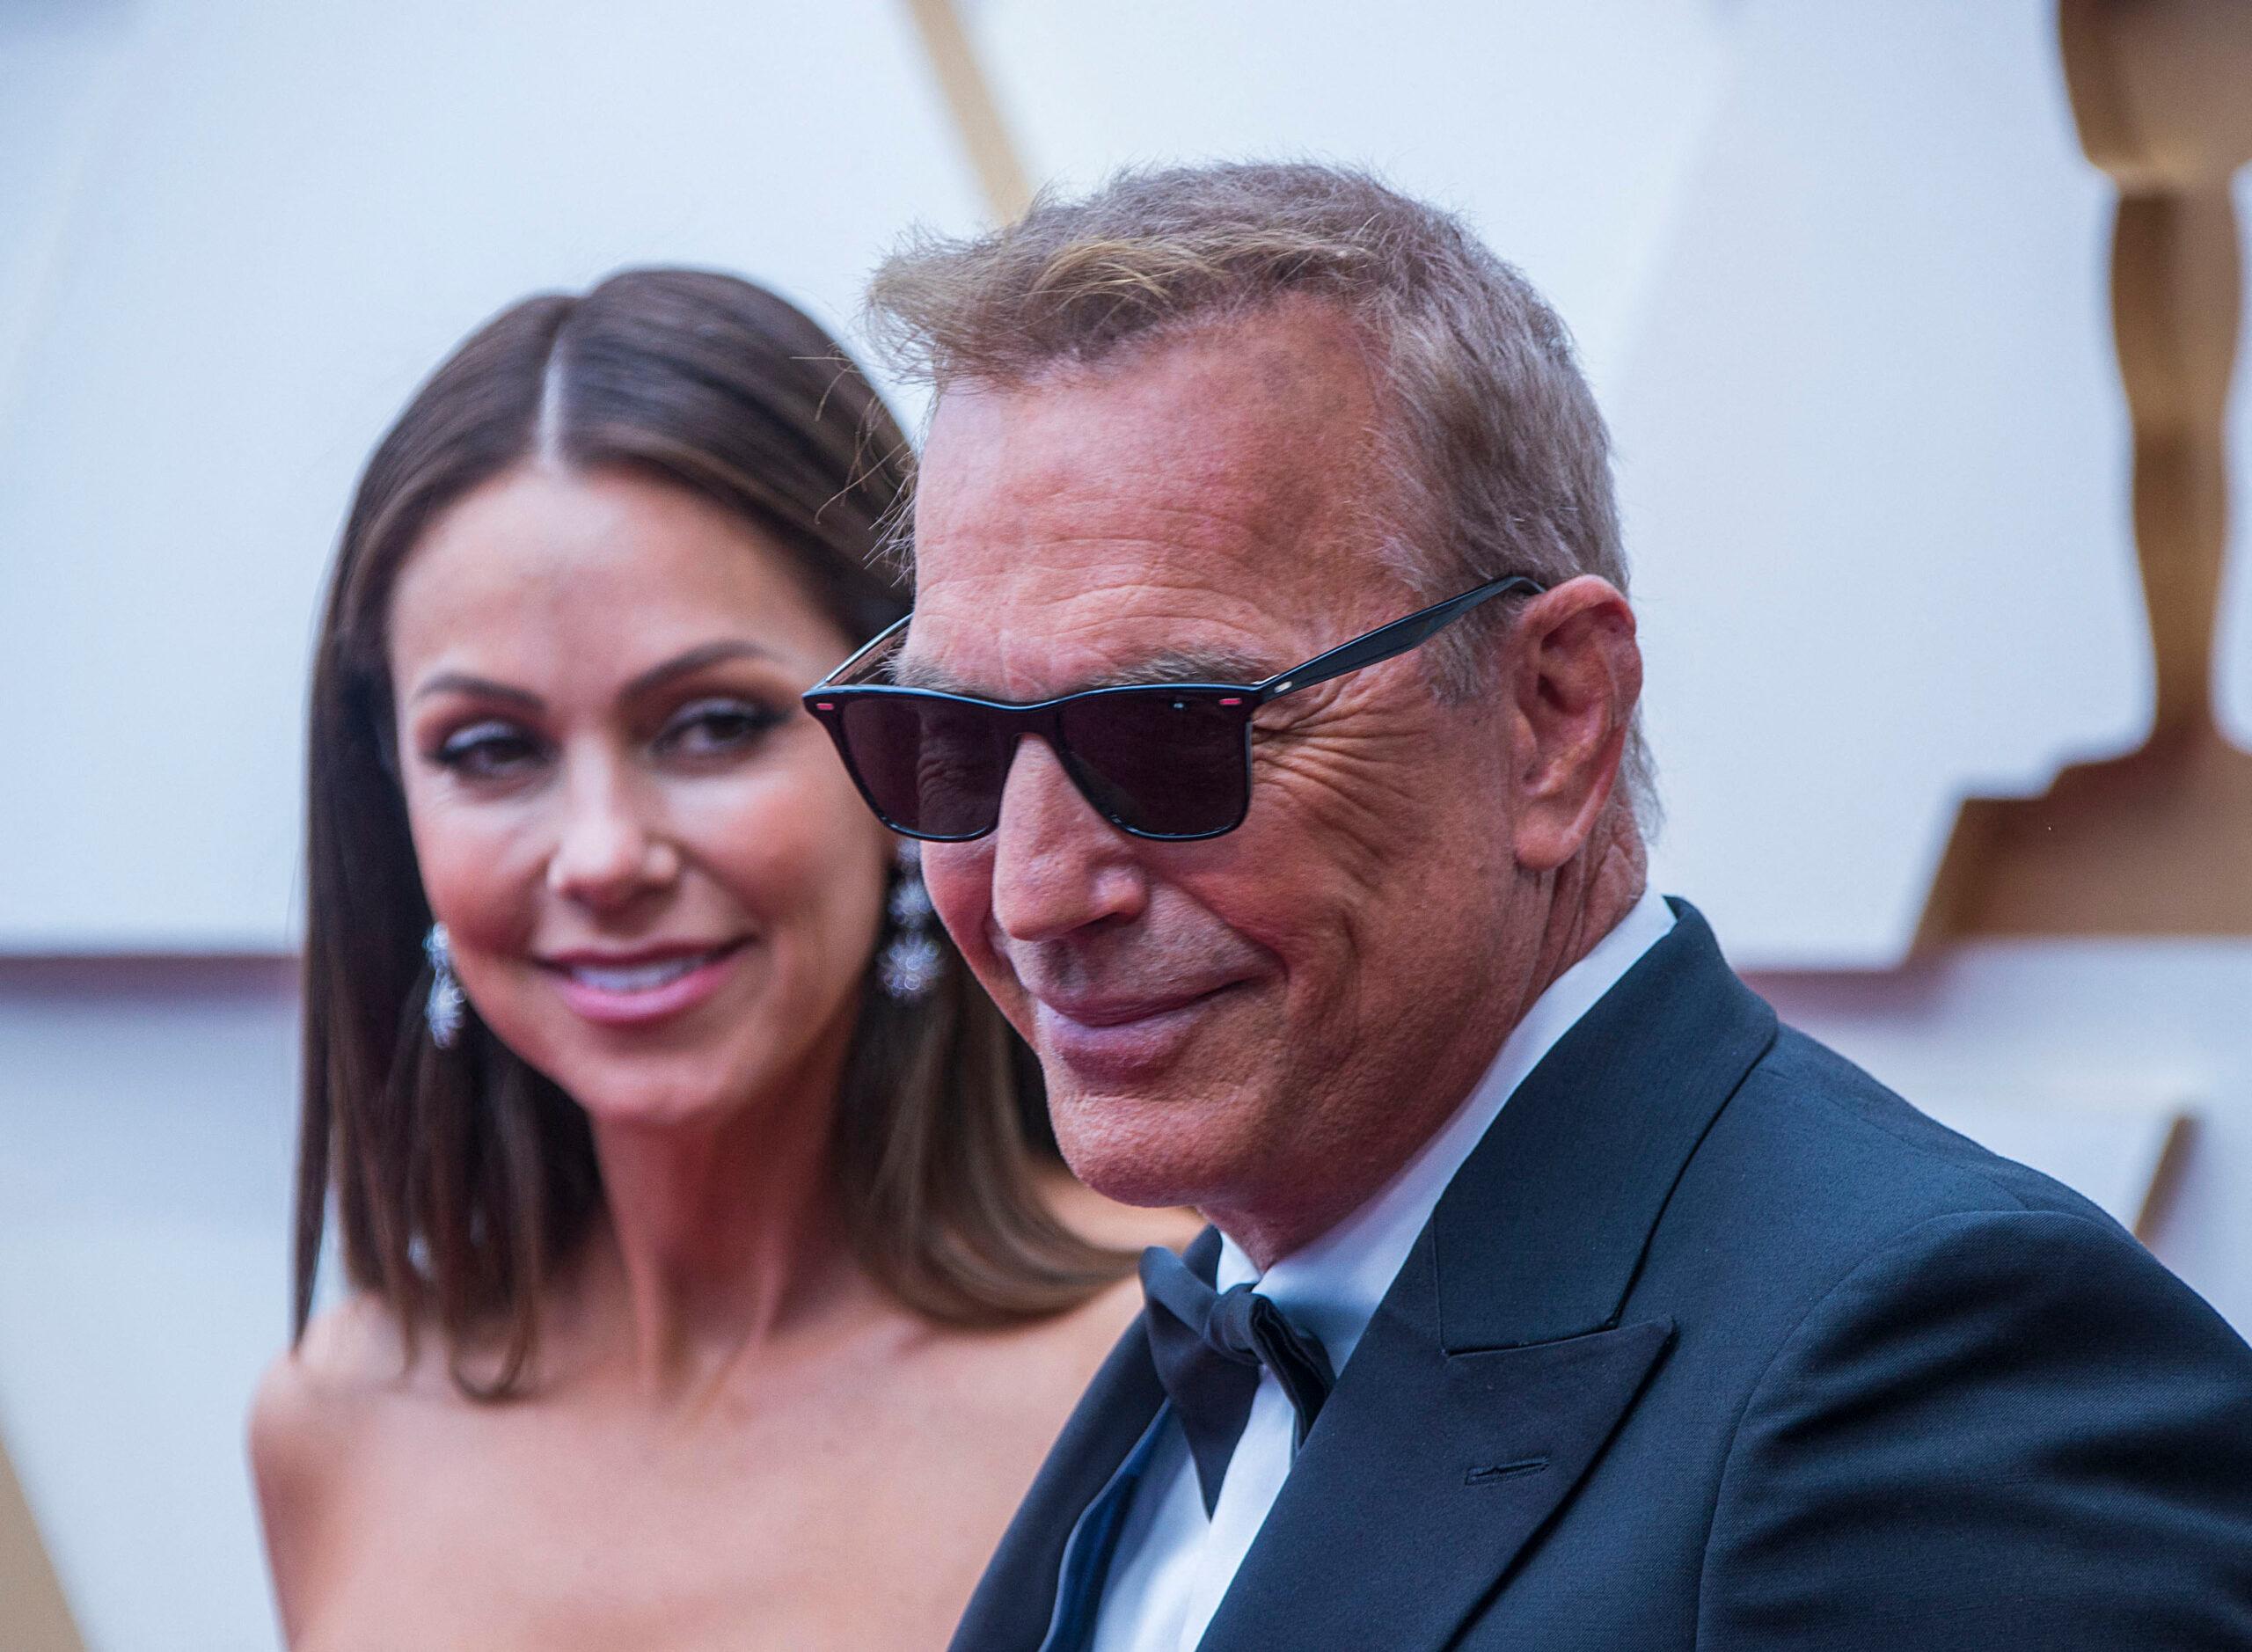 Christine Baumgartner and Kevin Costner at the 28th Annual Screen Actors Guild Awards held on Sunday February 27, 2022 at The Barker Hangar in Santa Monica, California. 24 Jun 2023 Pictured: June 24, 2023, Los Angeles, California, USA: Kevin Costner divorces Christine Baumgartner. FILE PHOTO: Christine Baumgartner and Kevin Costner at the Red Carpet of the 94th Annual Academy Awards